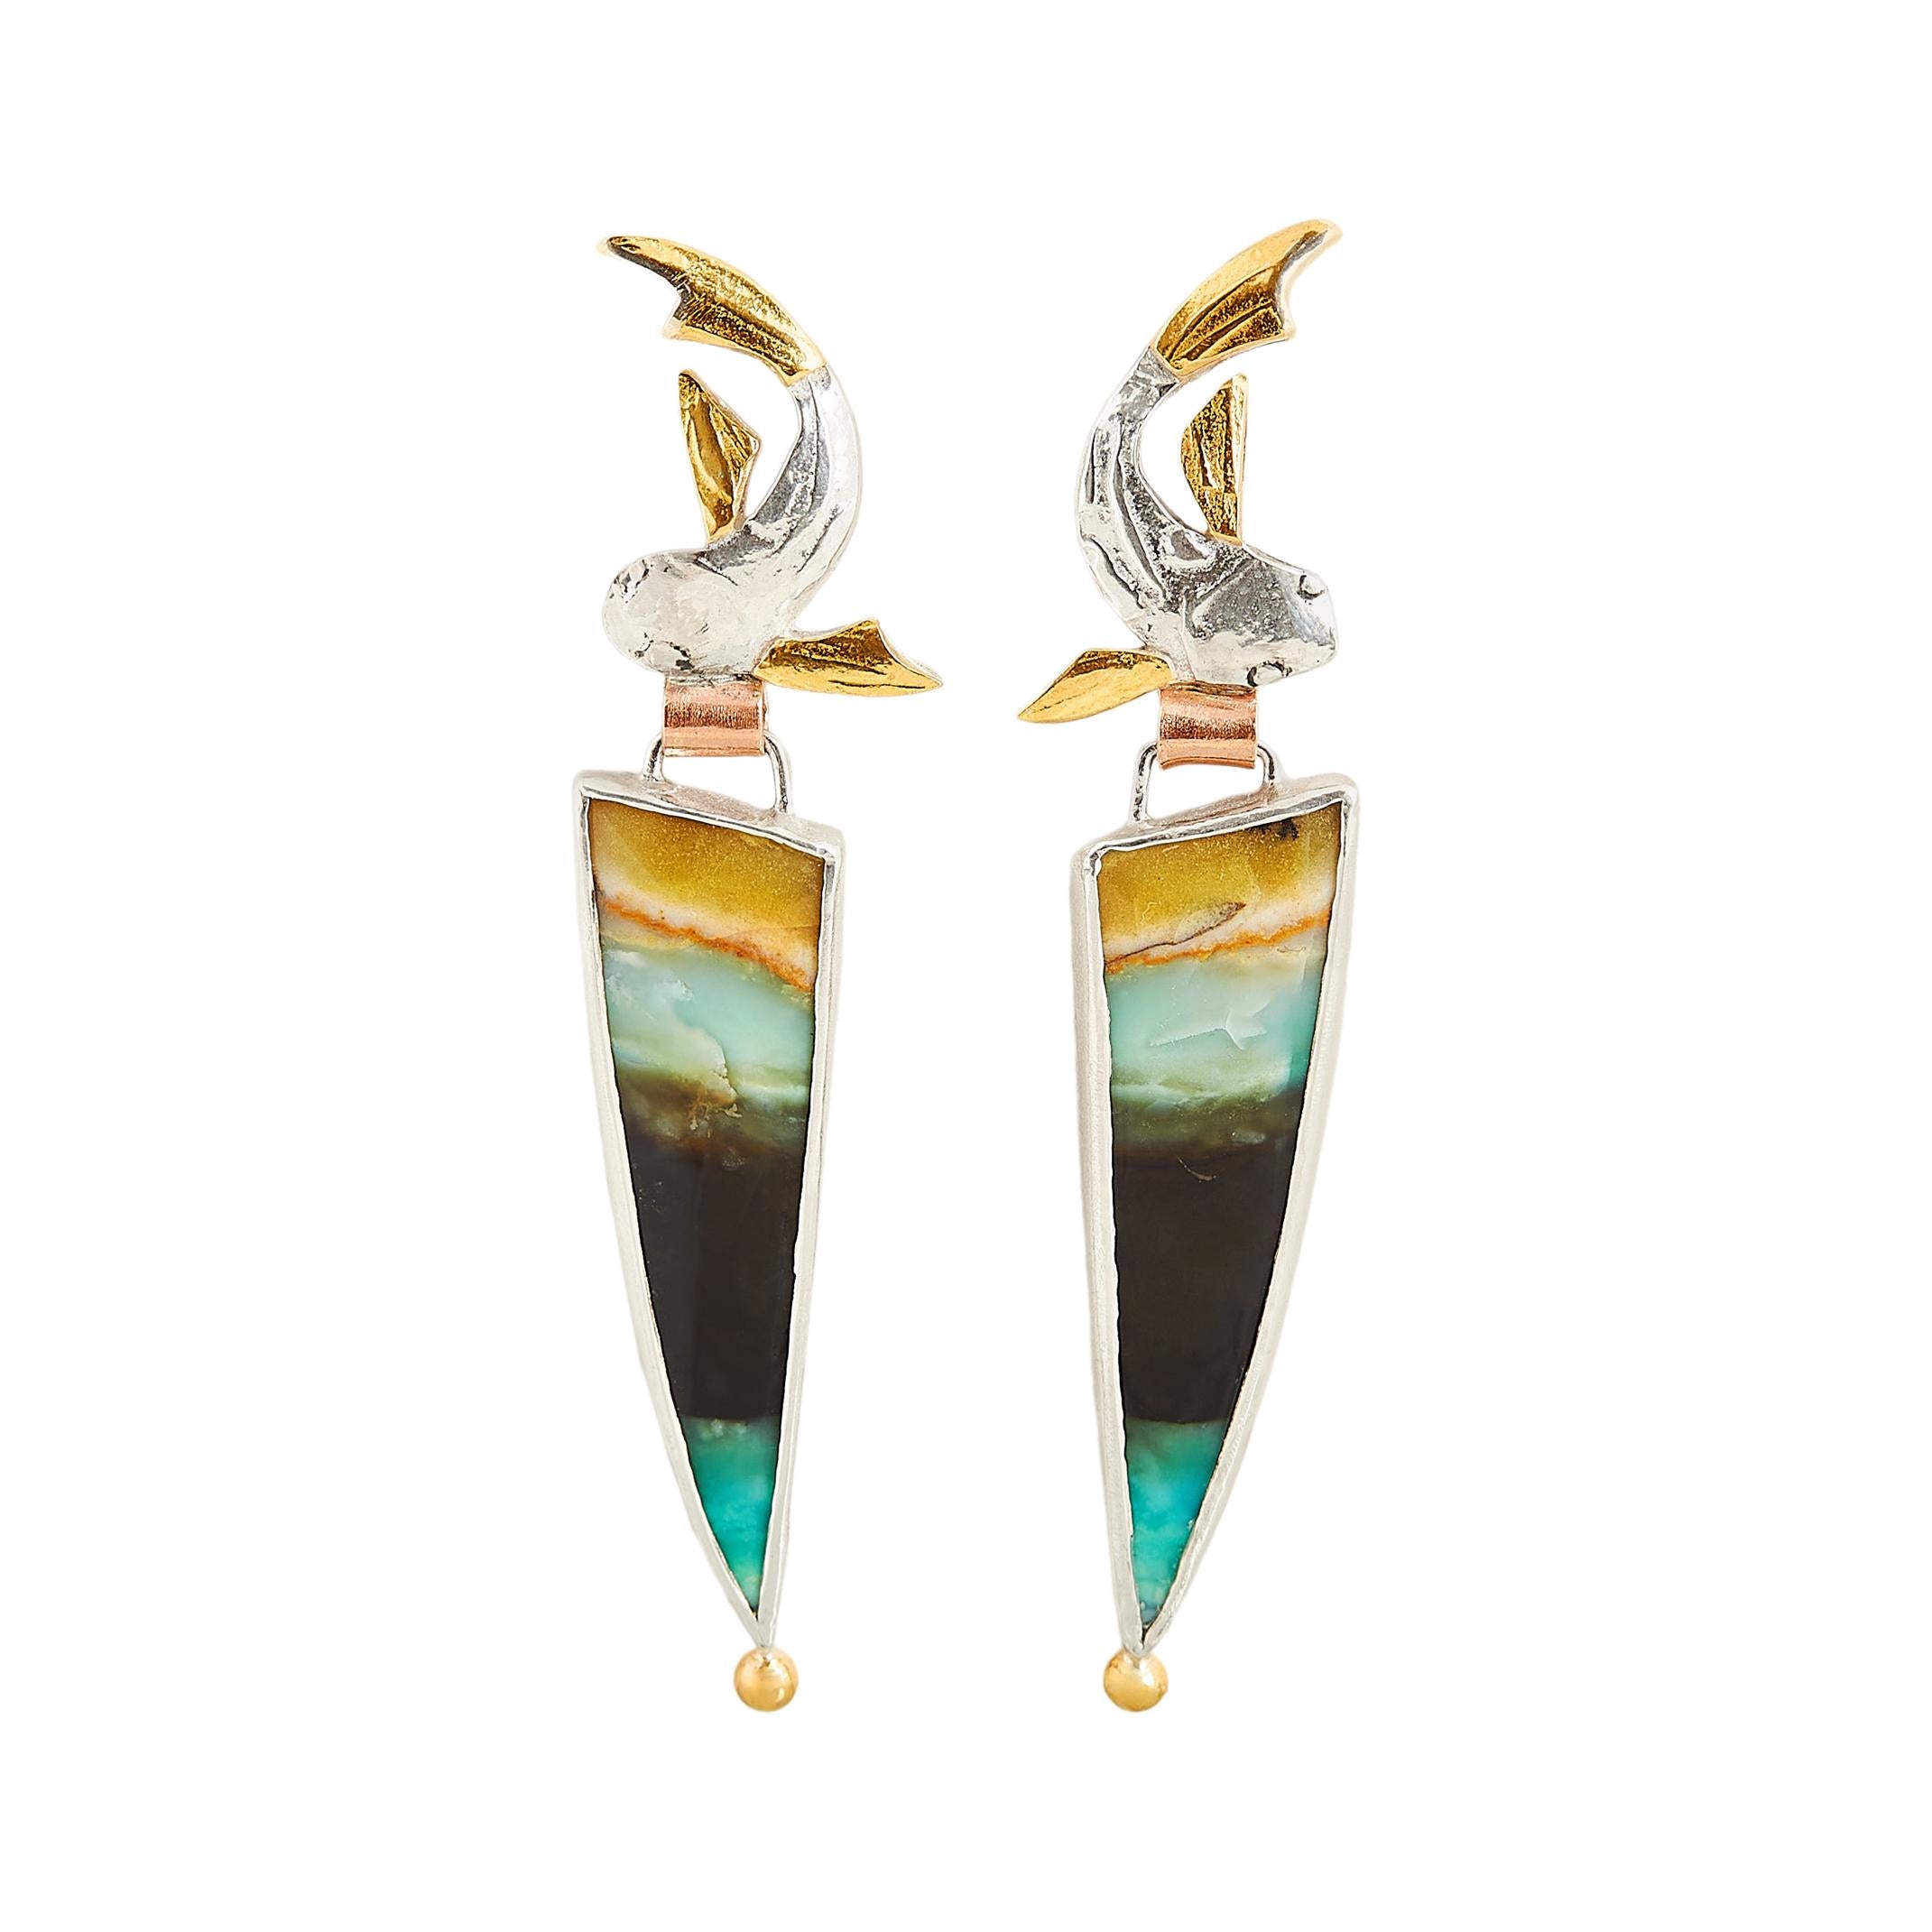 Fish Earrings with Opalized Wood Stones, 22 and 18 Karat Yellow Gold and Silver